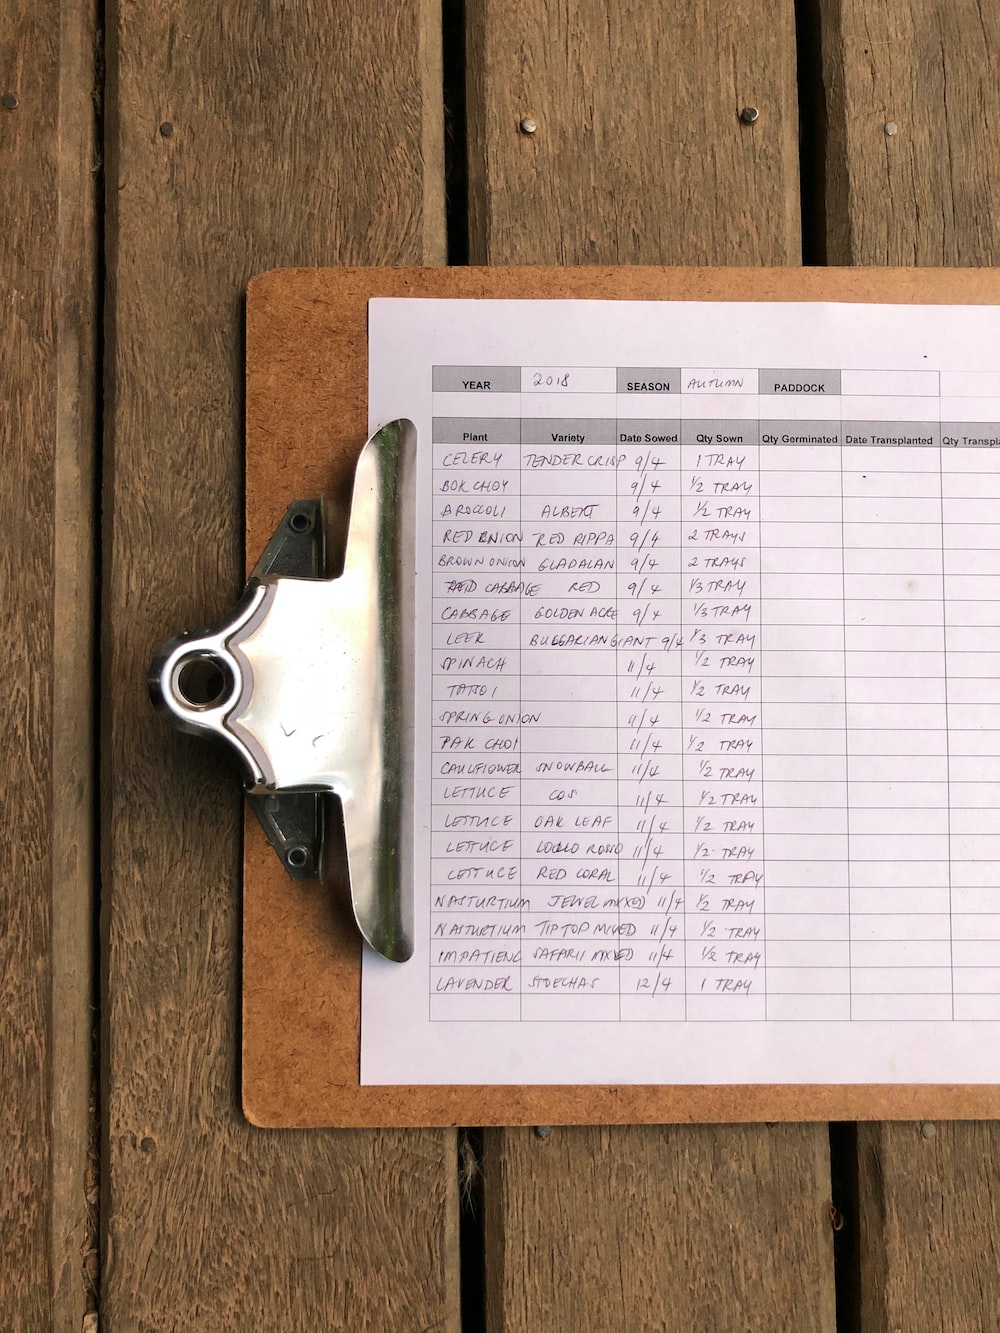 How long should you keep personal records?